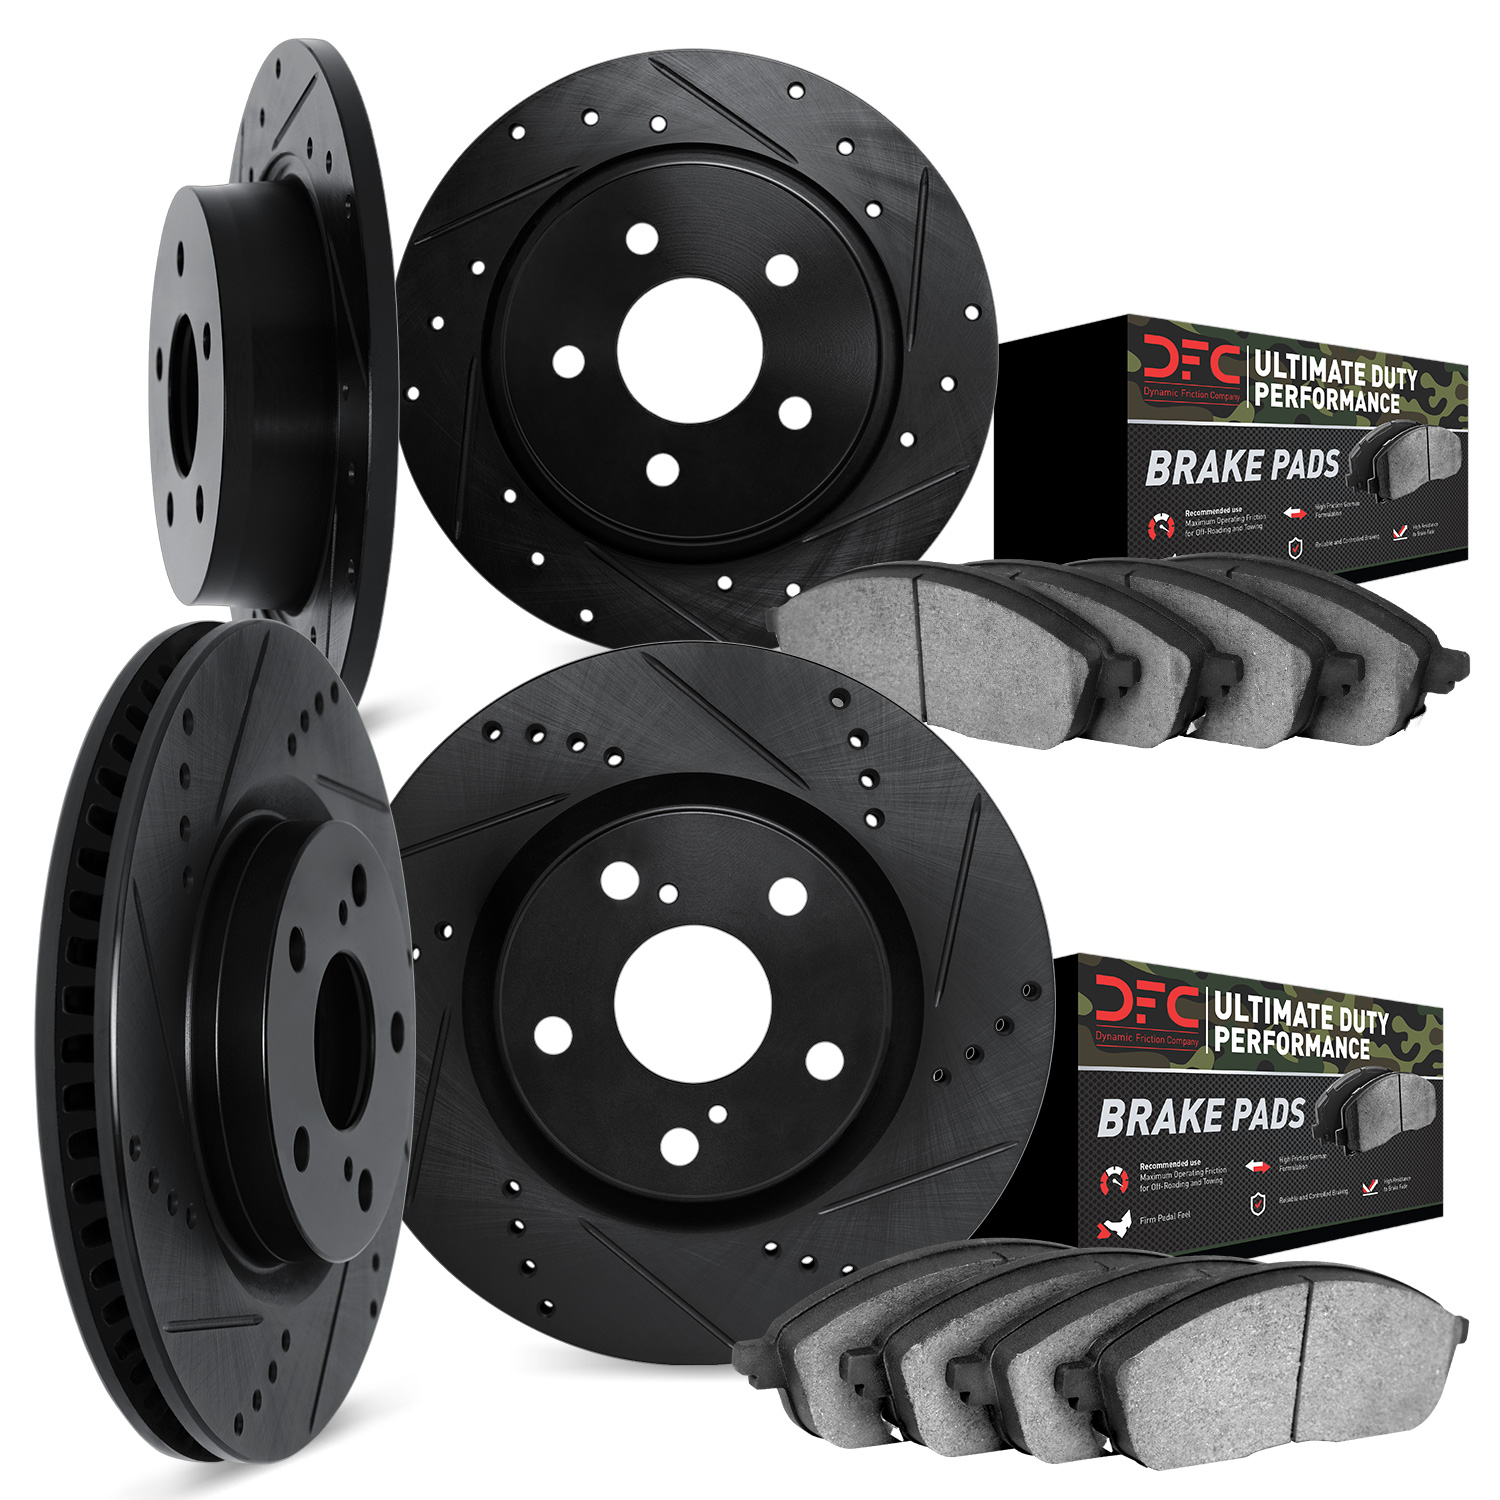 8404-42012 Drilled/Slotted Brake Rotors with Ultimate-Duty Brake Pads Kit [Black], 1993-1998 Mopar, Position: Front and Rear